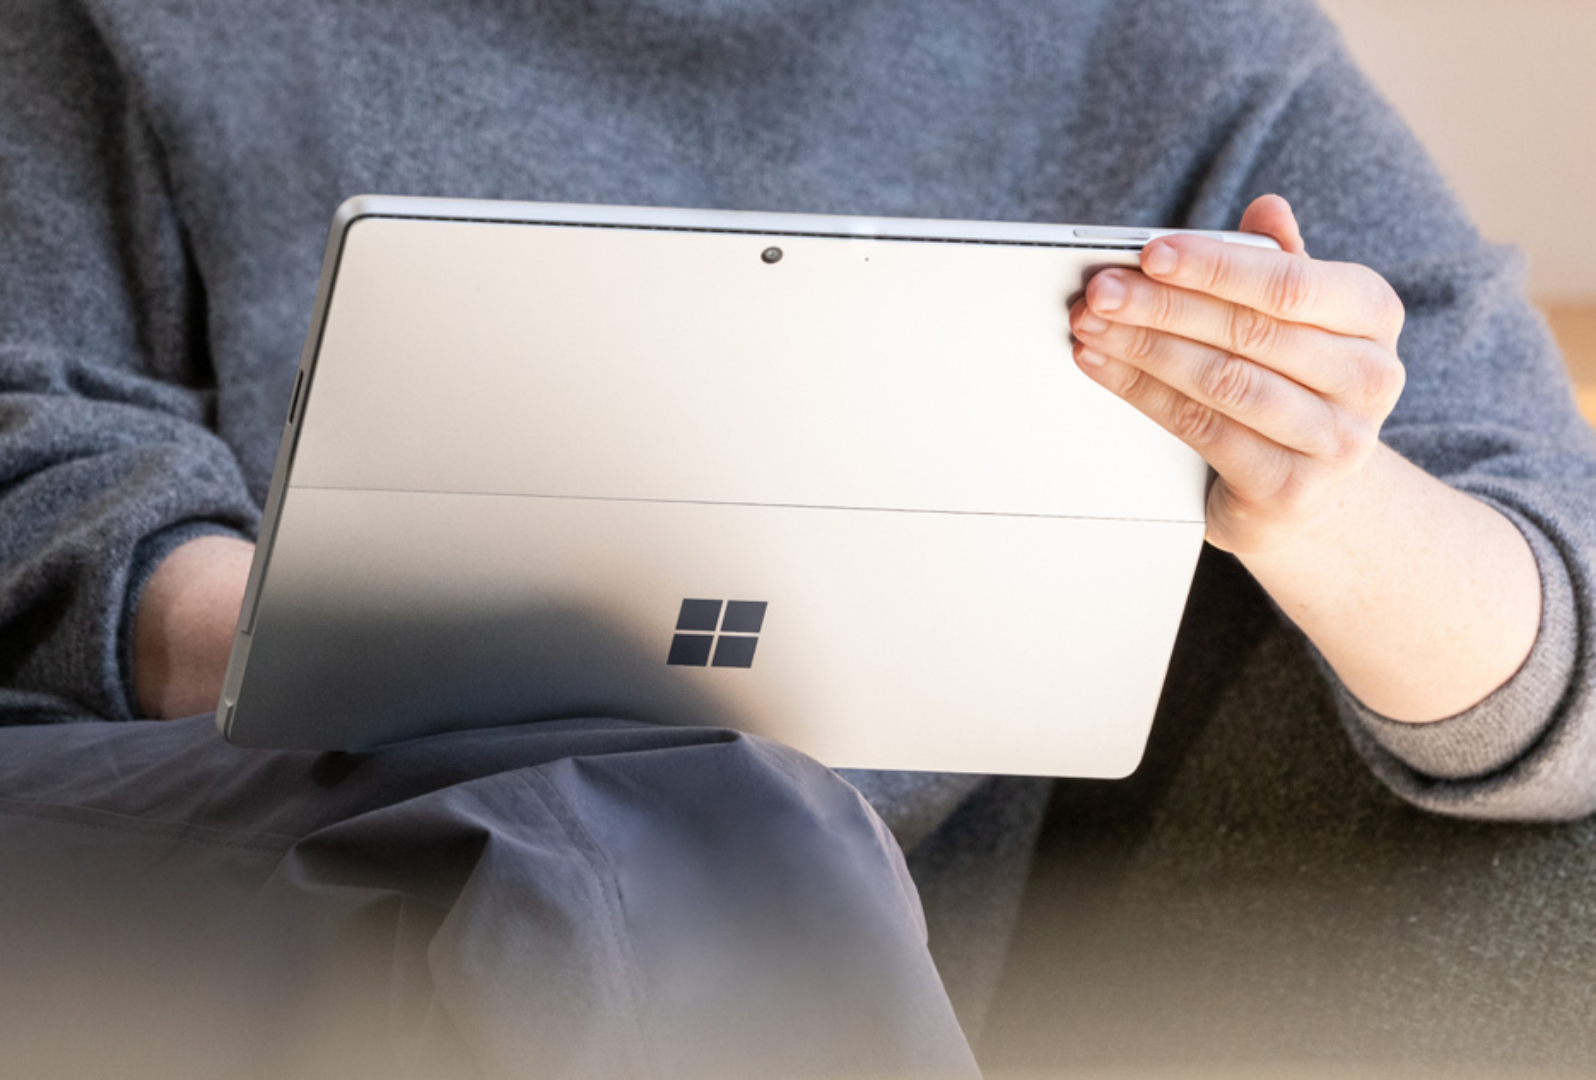 Close-up of person holding a Surface device on their lap